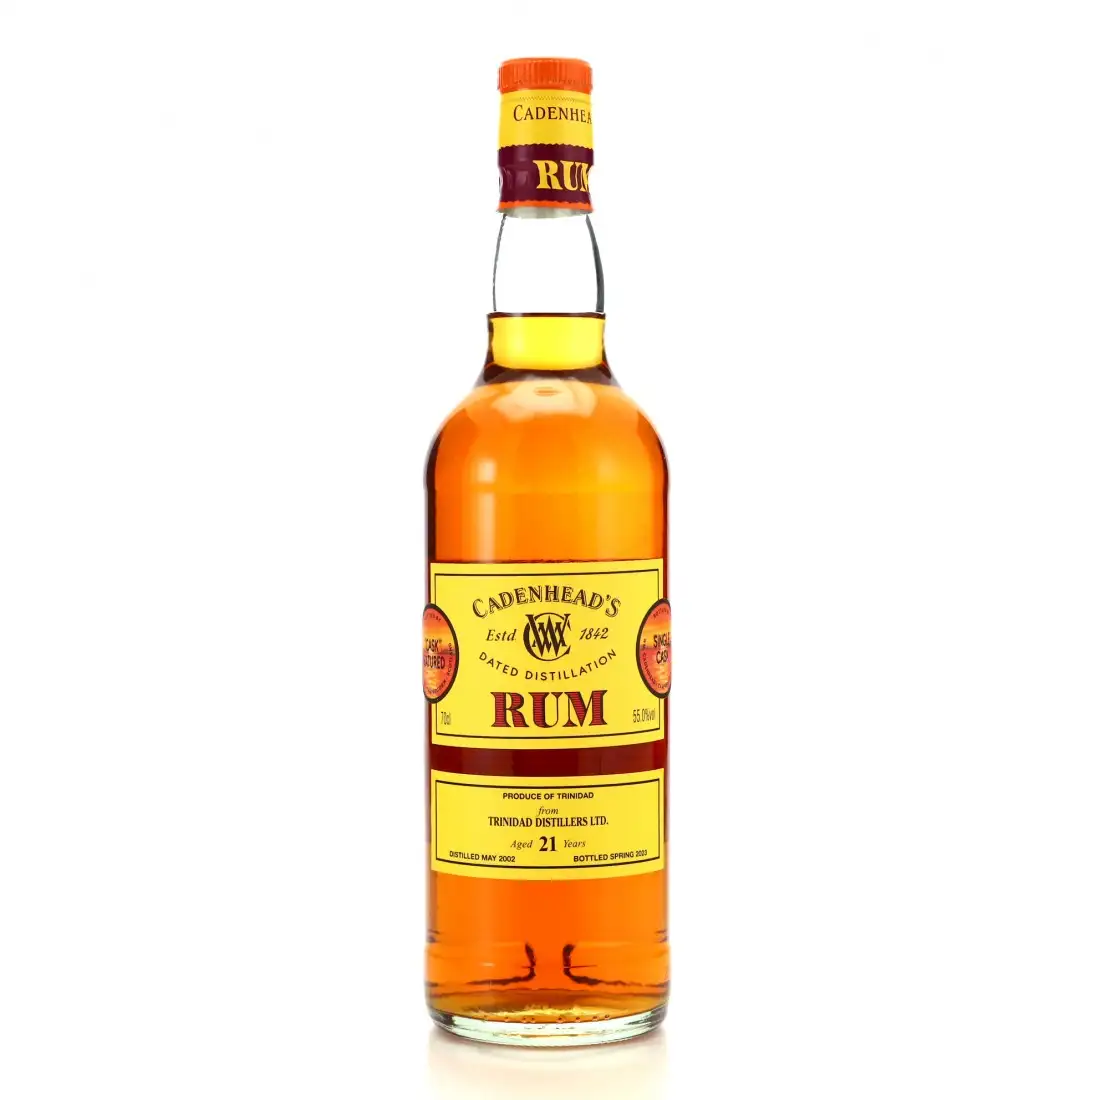 Image of the front of the bottle of the rum Trinidad Distillers Ltd.